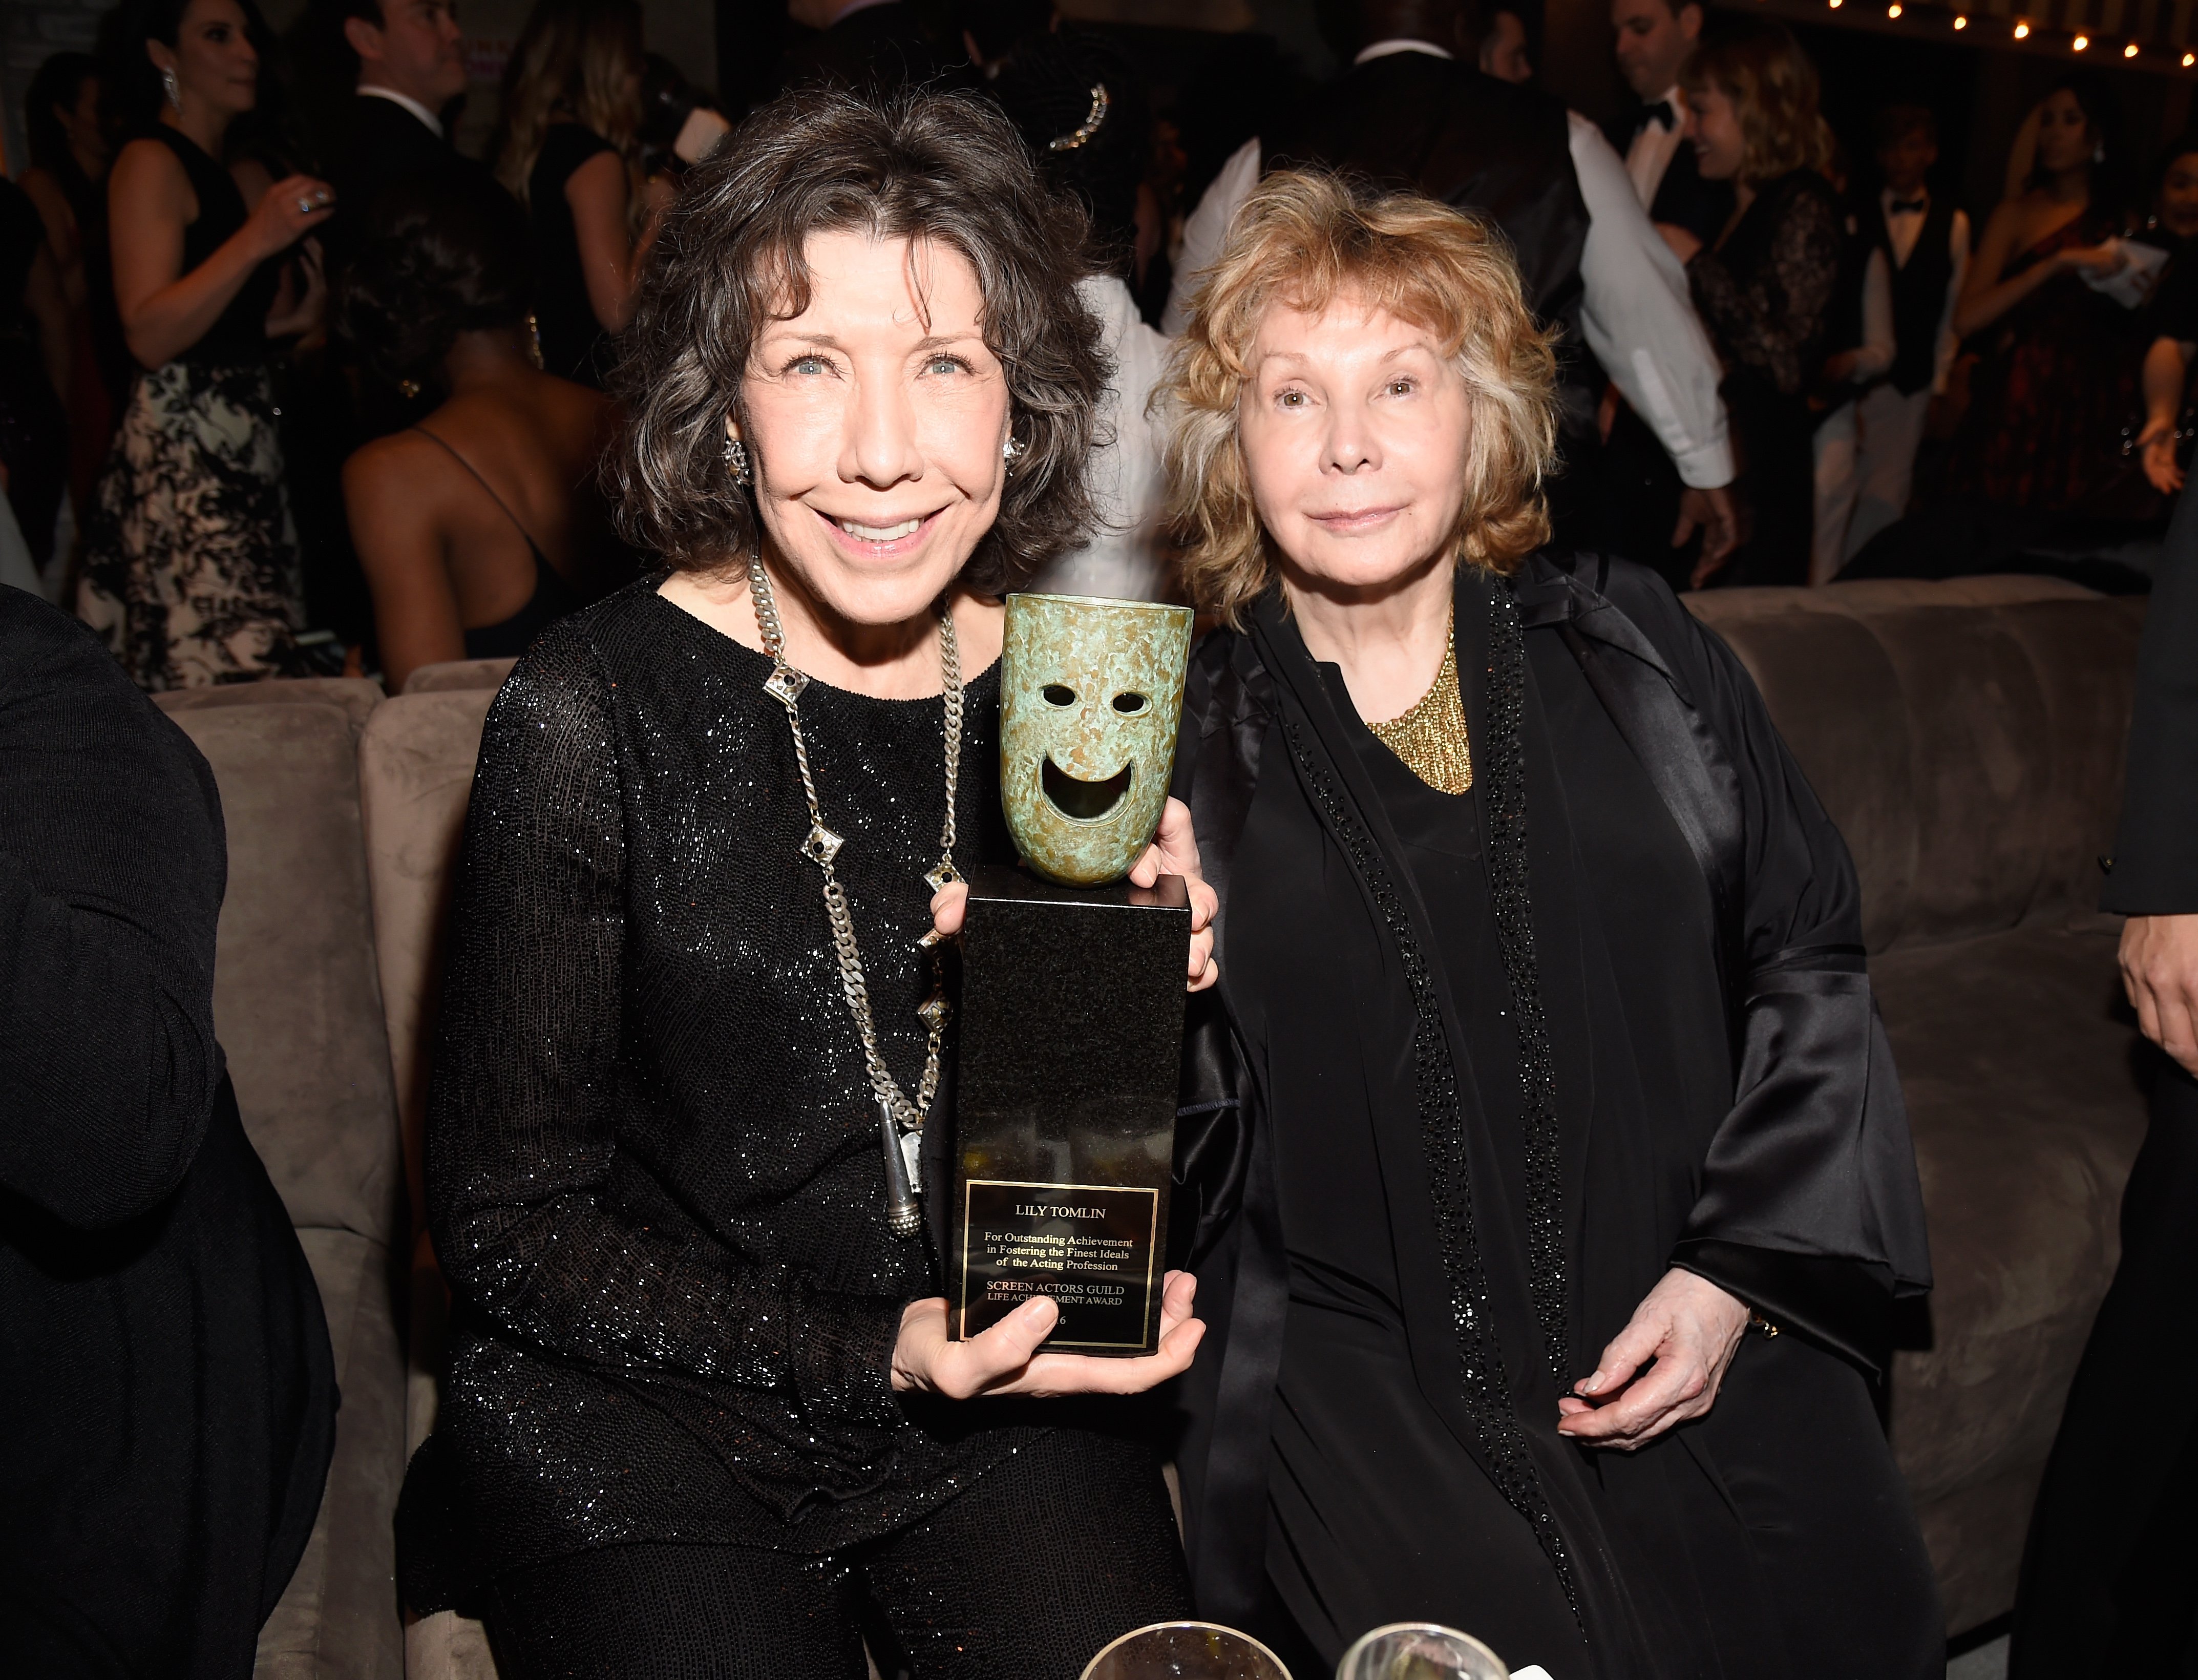  Lily Tomlin and Jane Wagner attend People And EIF's Annual Screen Actors Guild Awards Gala on January 29, 2017. | Source: Getty Images